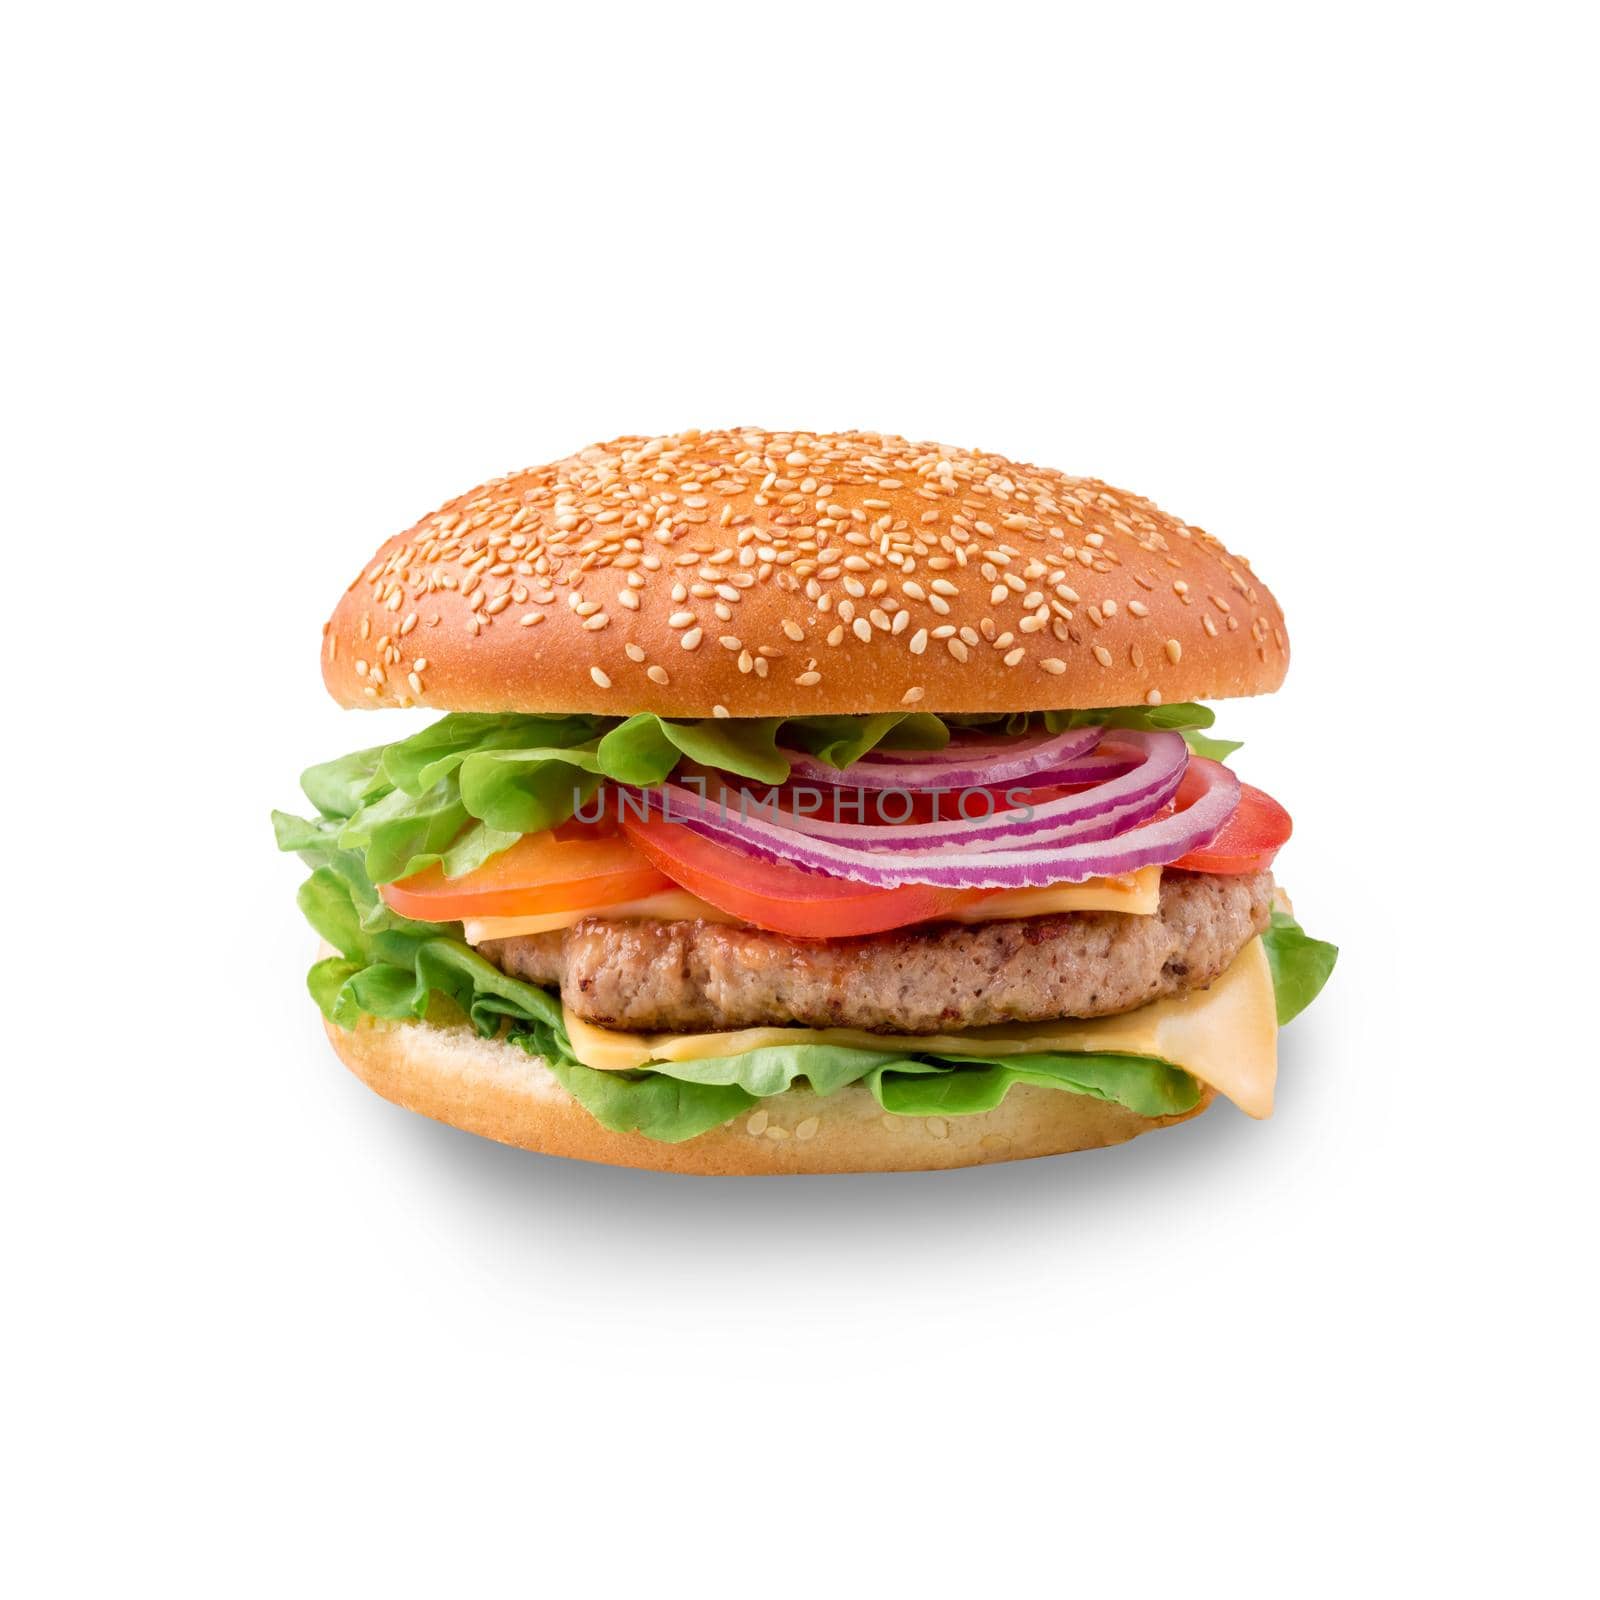 Perfect hamburger classic burger american cheeseburger isolated on white background